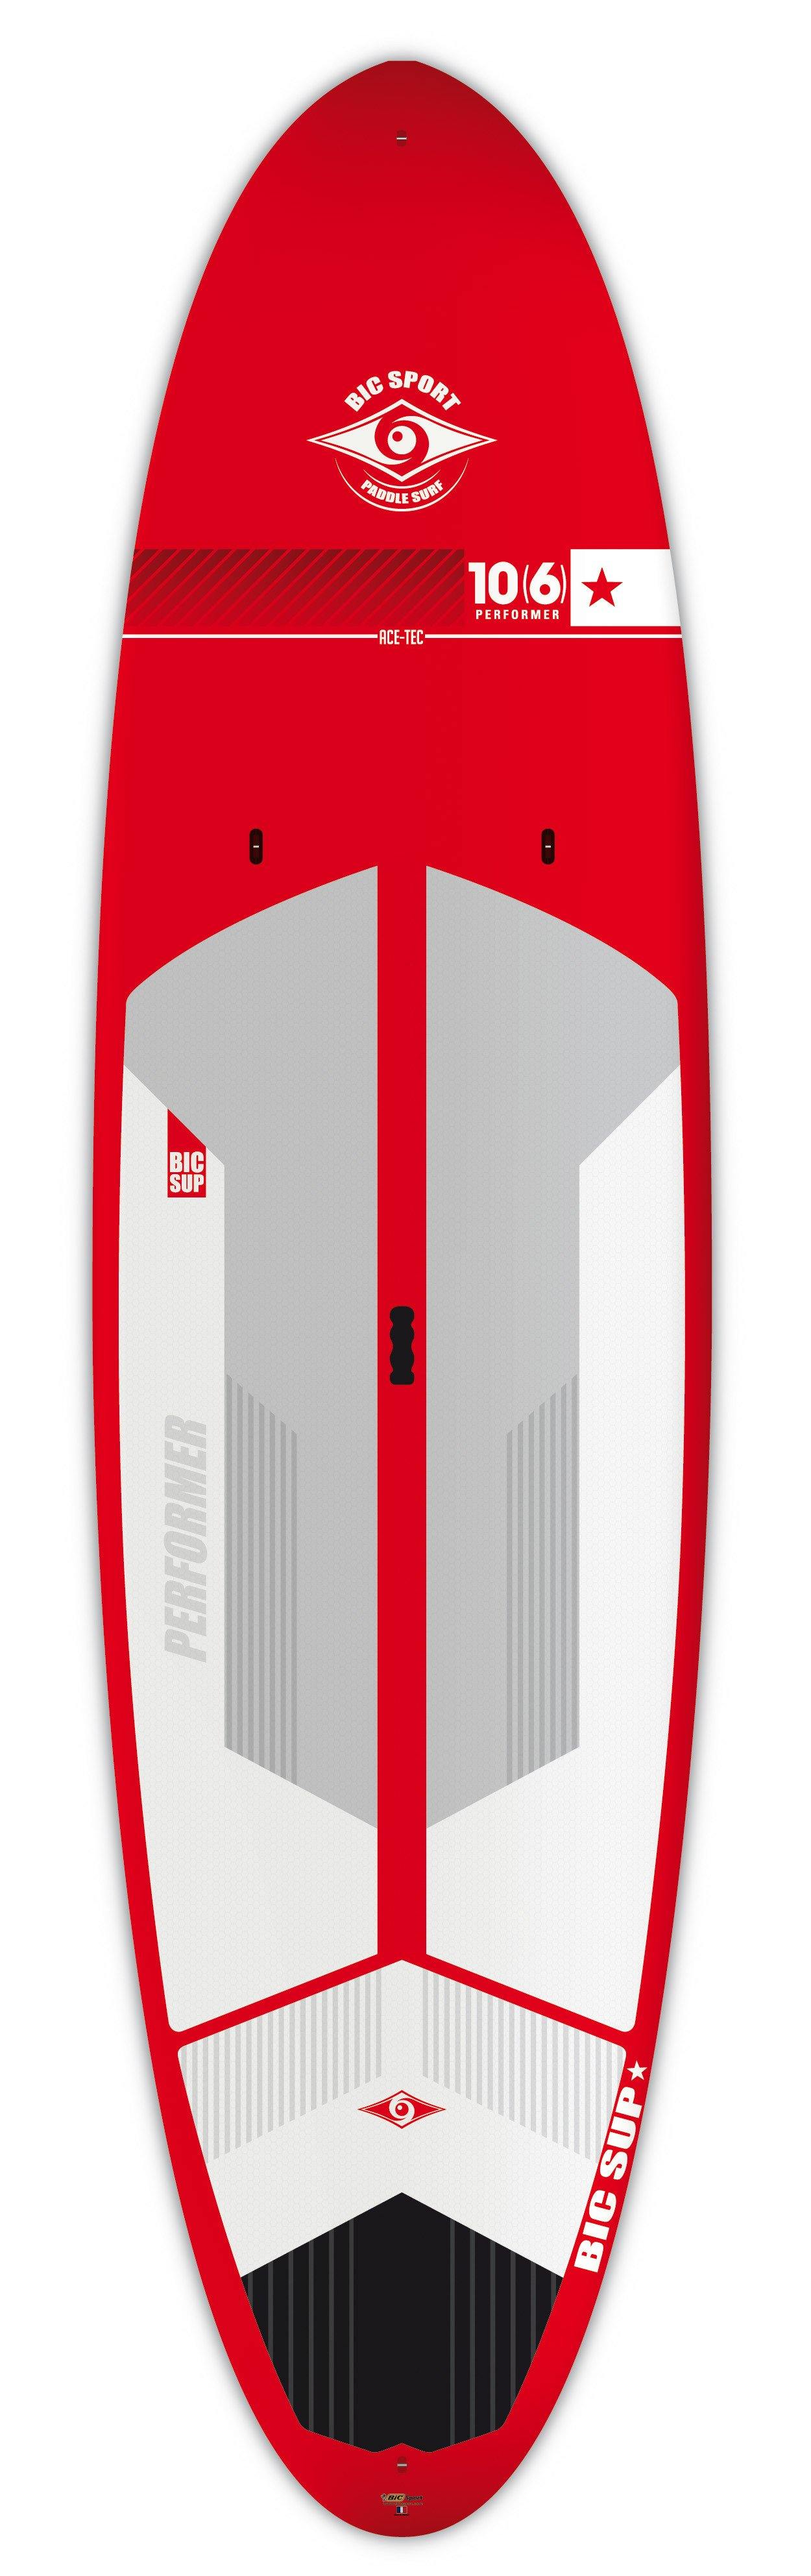 bic paddle board 10'6" red